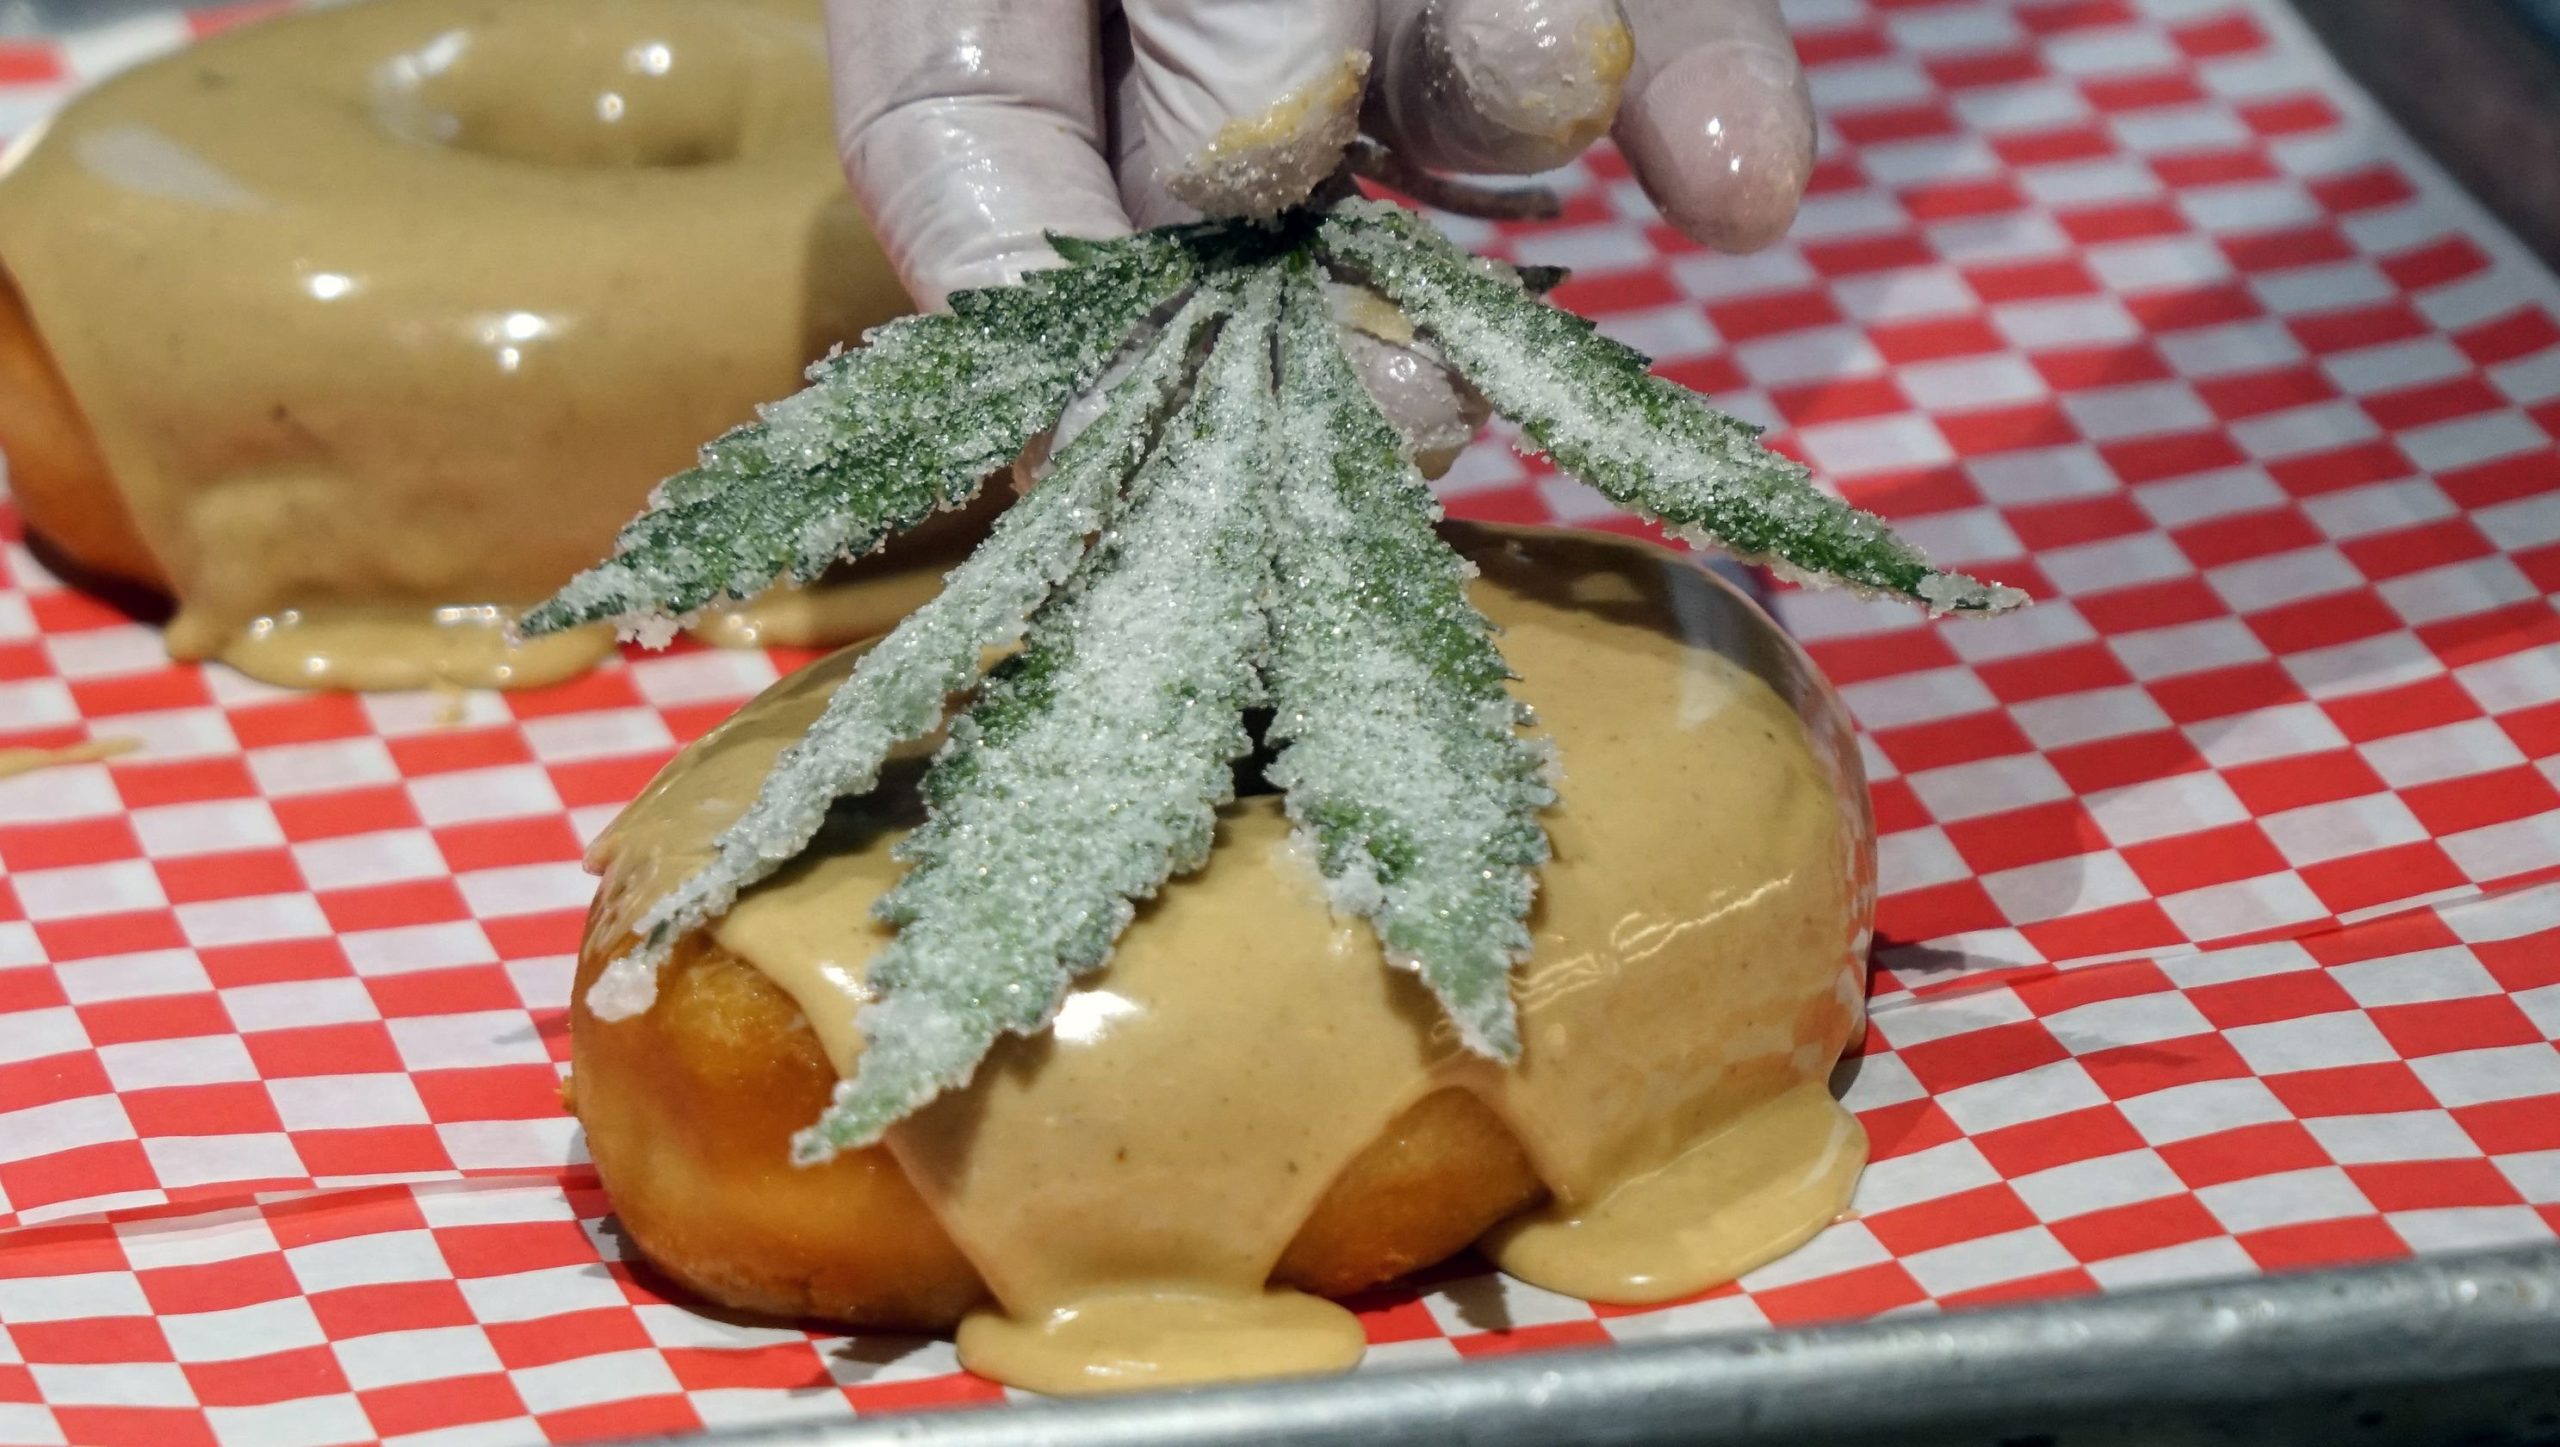 Cannabis food, drinks to be 2019's hottest dining trend, top chefs say